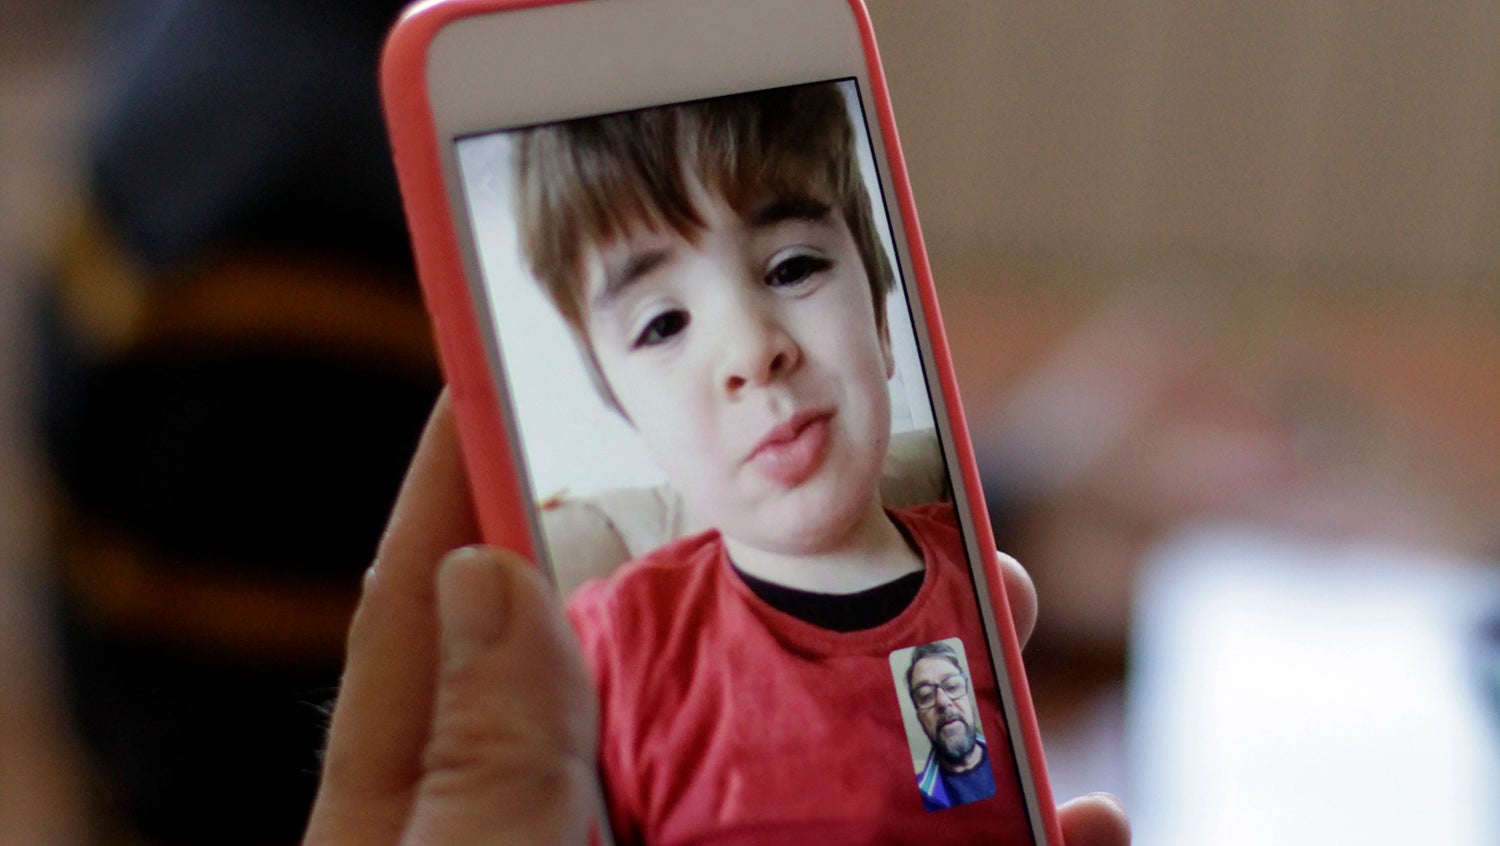 Young child appears on phone's screen in video chat